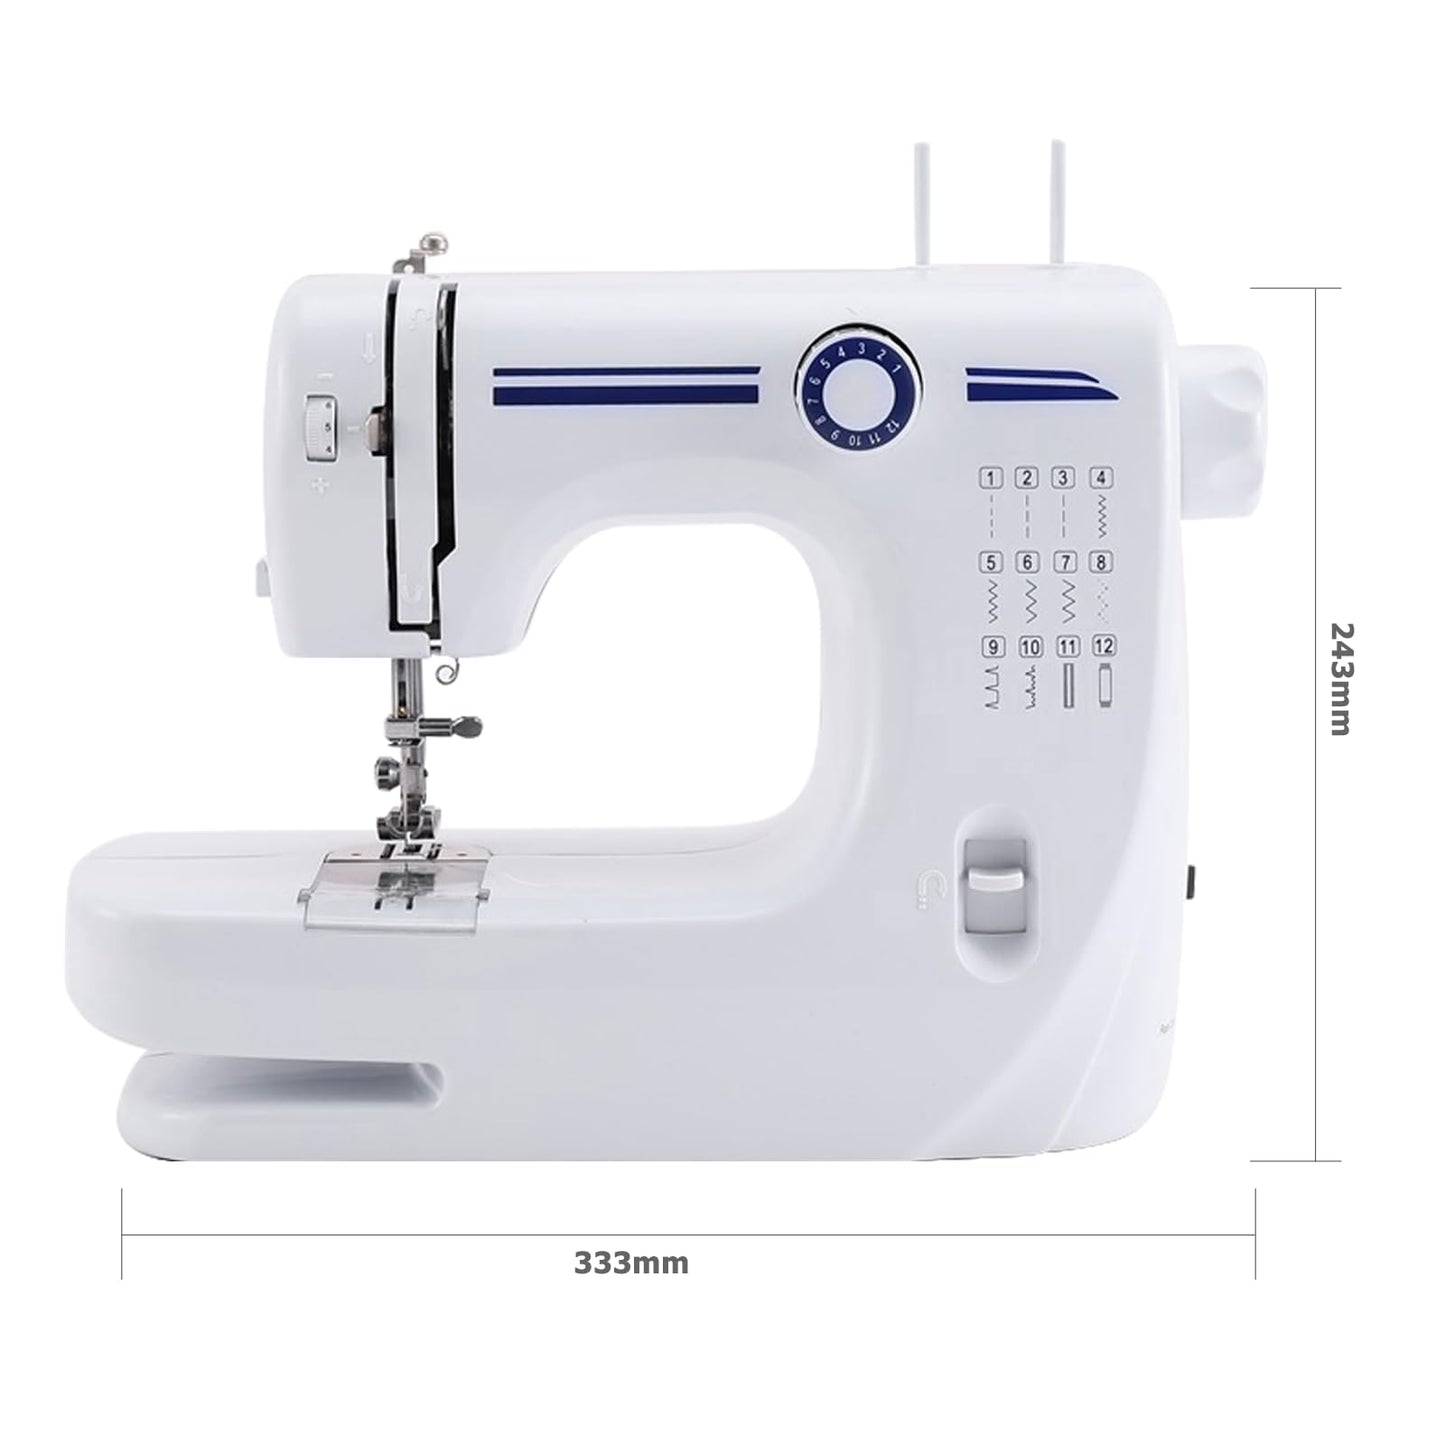 Sewing Machine, Sewing Machine for Beginners, Portable Sewing Machine Electric Portable for Beginners, 12 Built-In Stitches Dual Speed with Foot Pedal and Sewing Kit,Blue